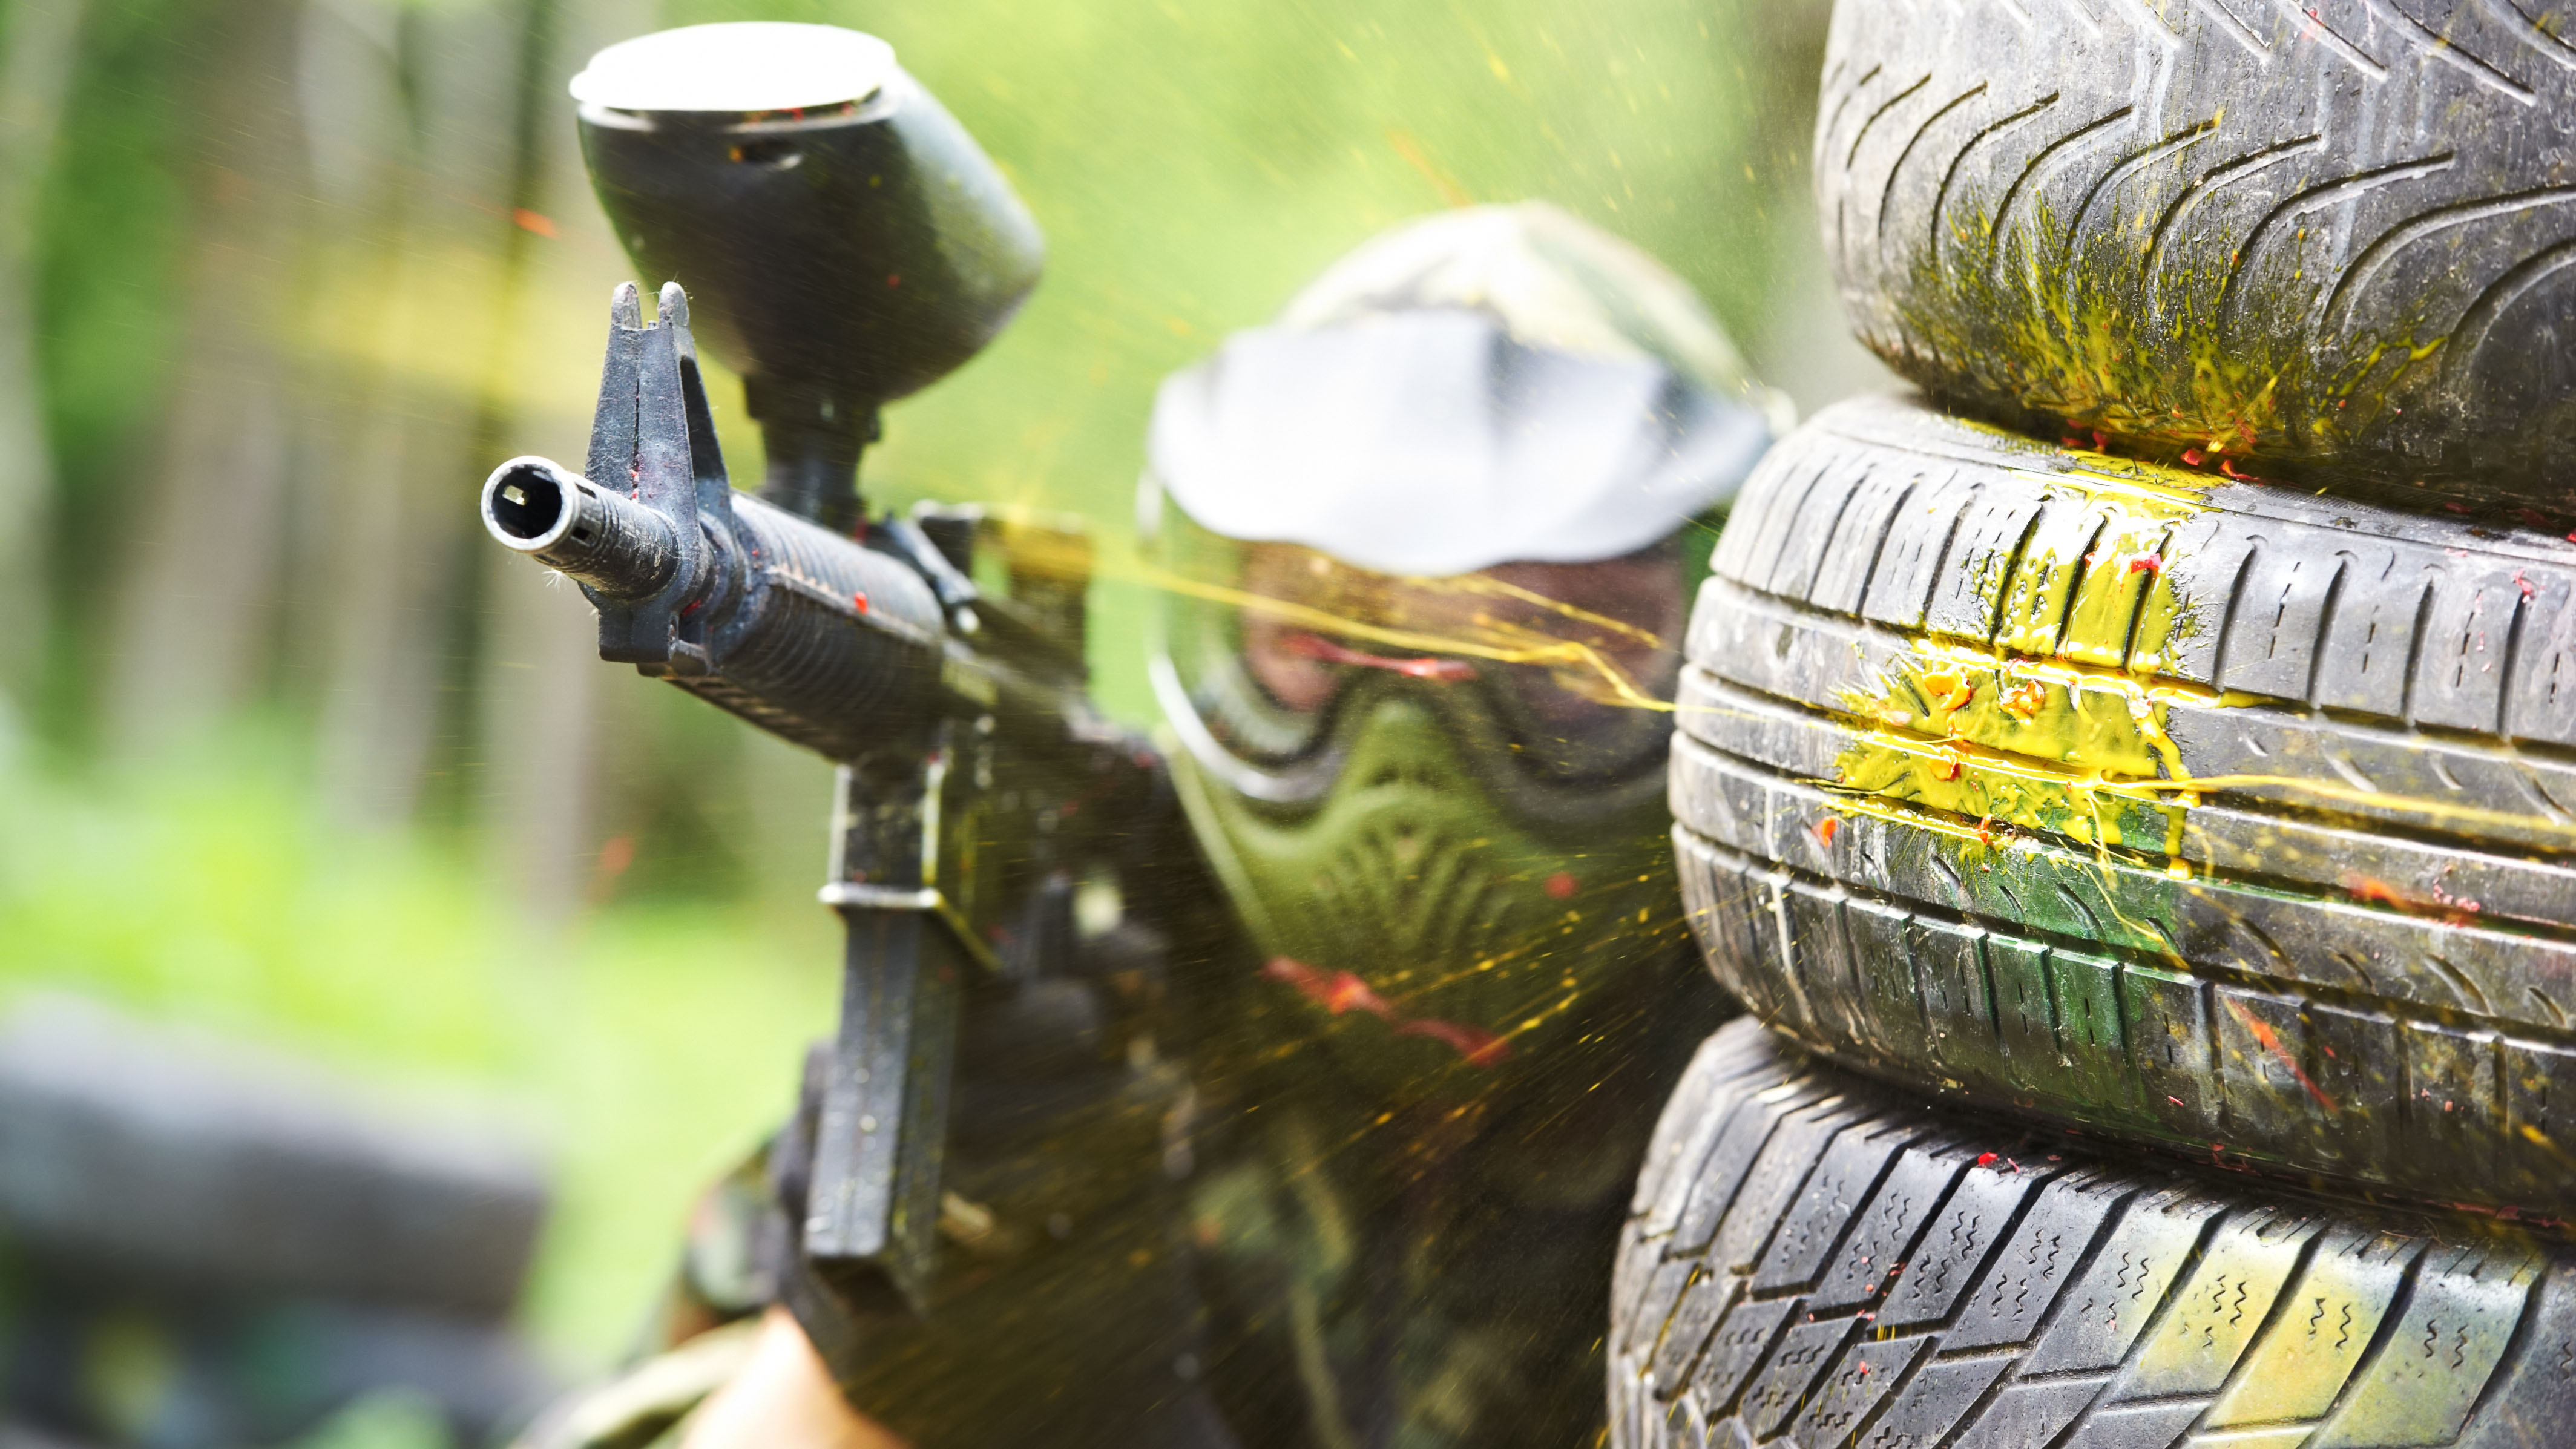 Paintballer crouching behind tire